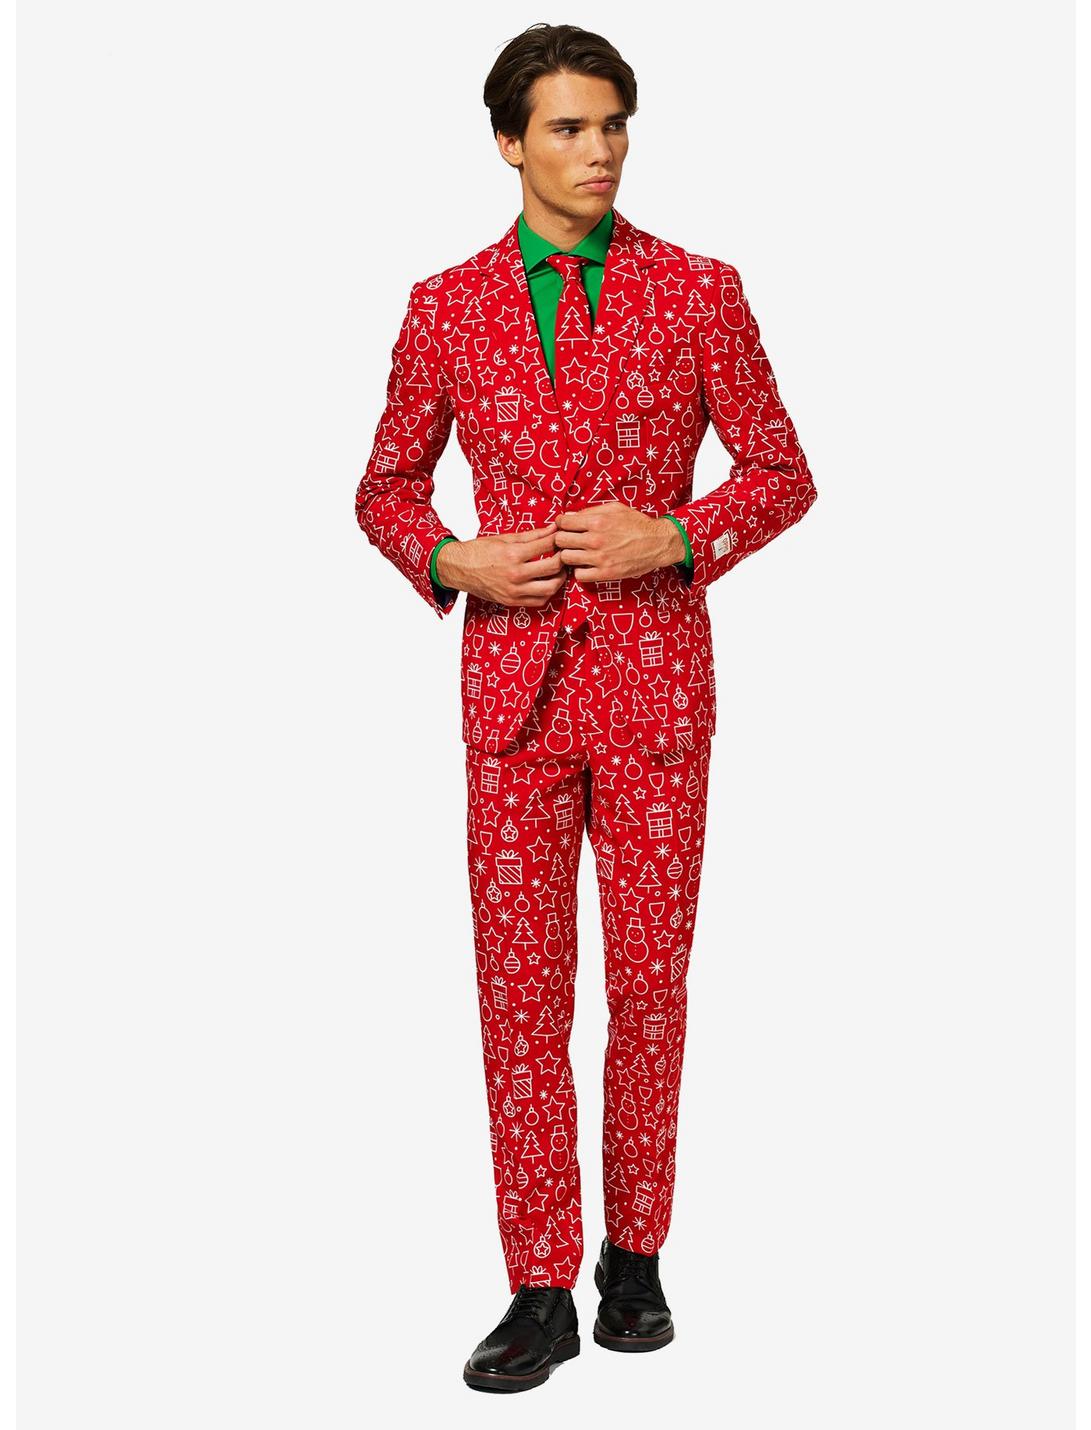 OppoSuits Men's Iconicool Christmas Suit, RED, hi-res